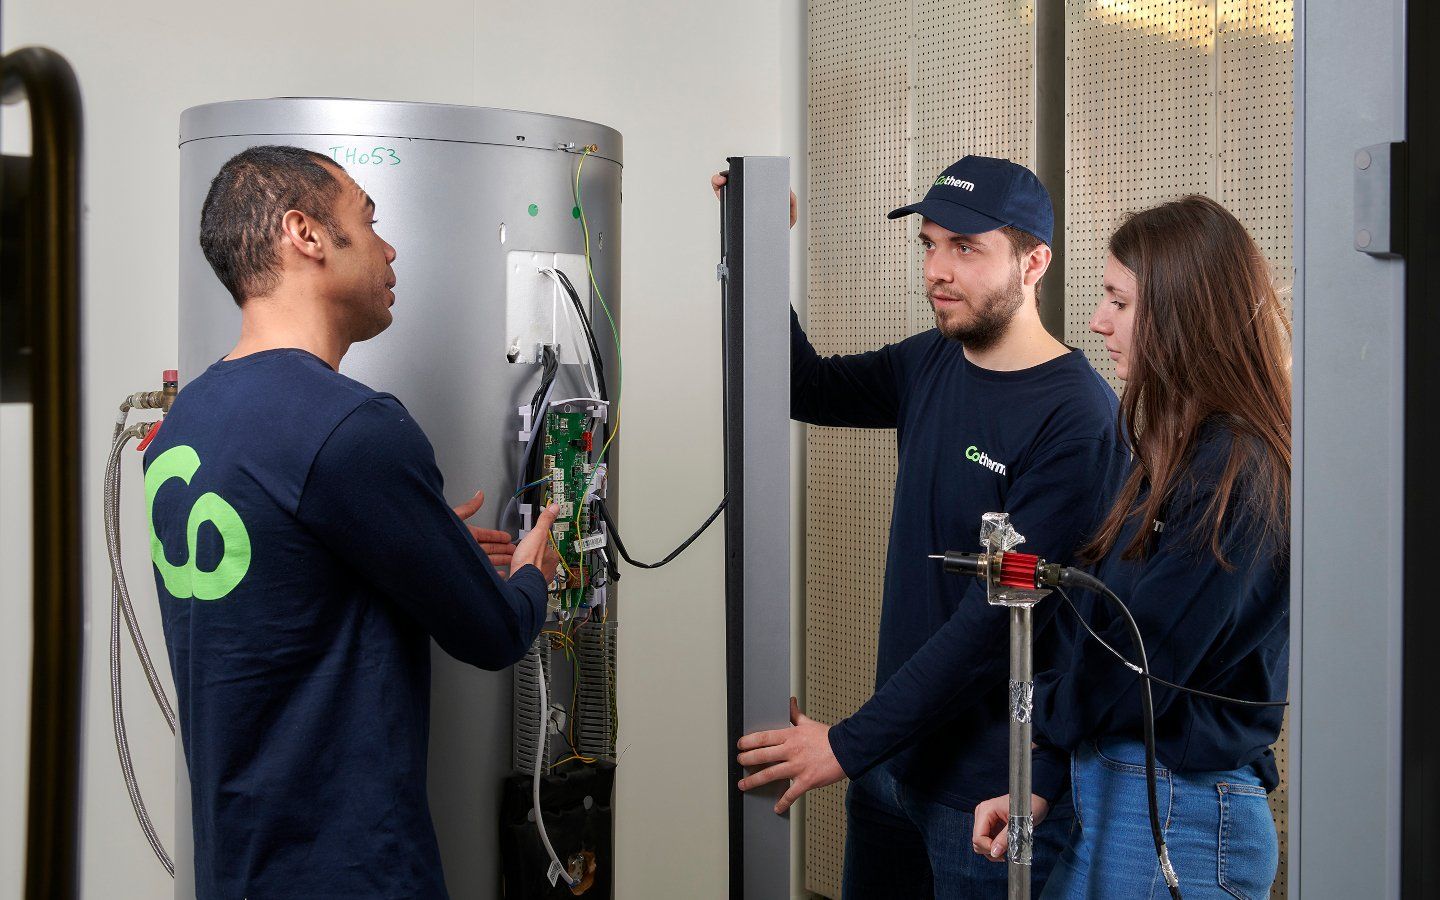 Cotherm employees inspecting a hot water cylinders thermostat and electronics